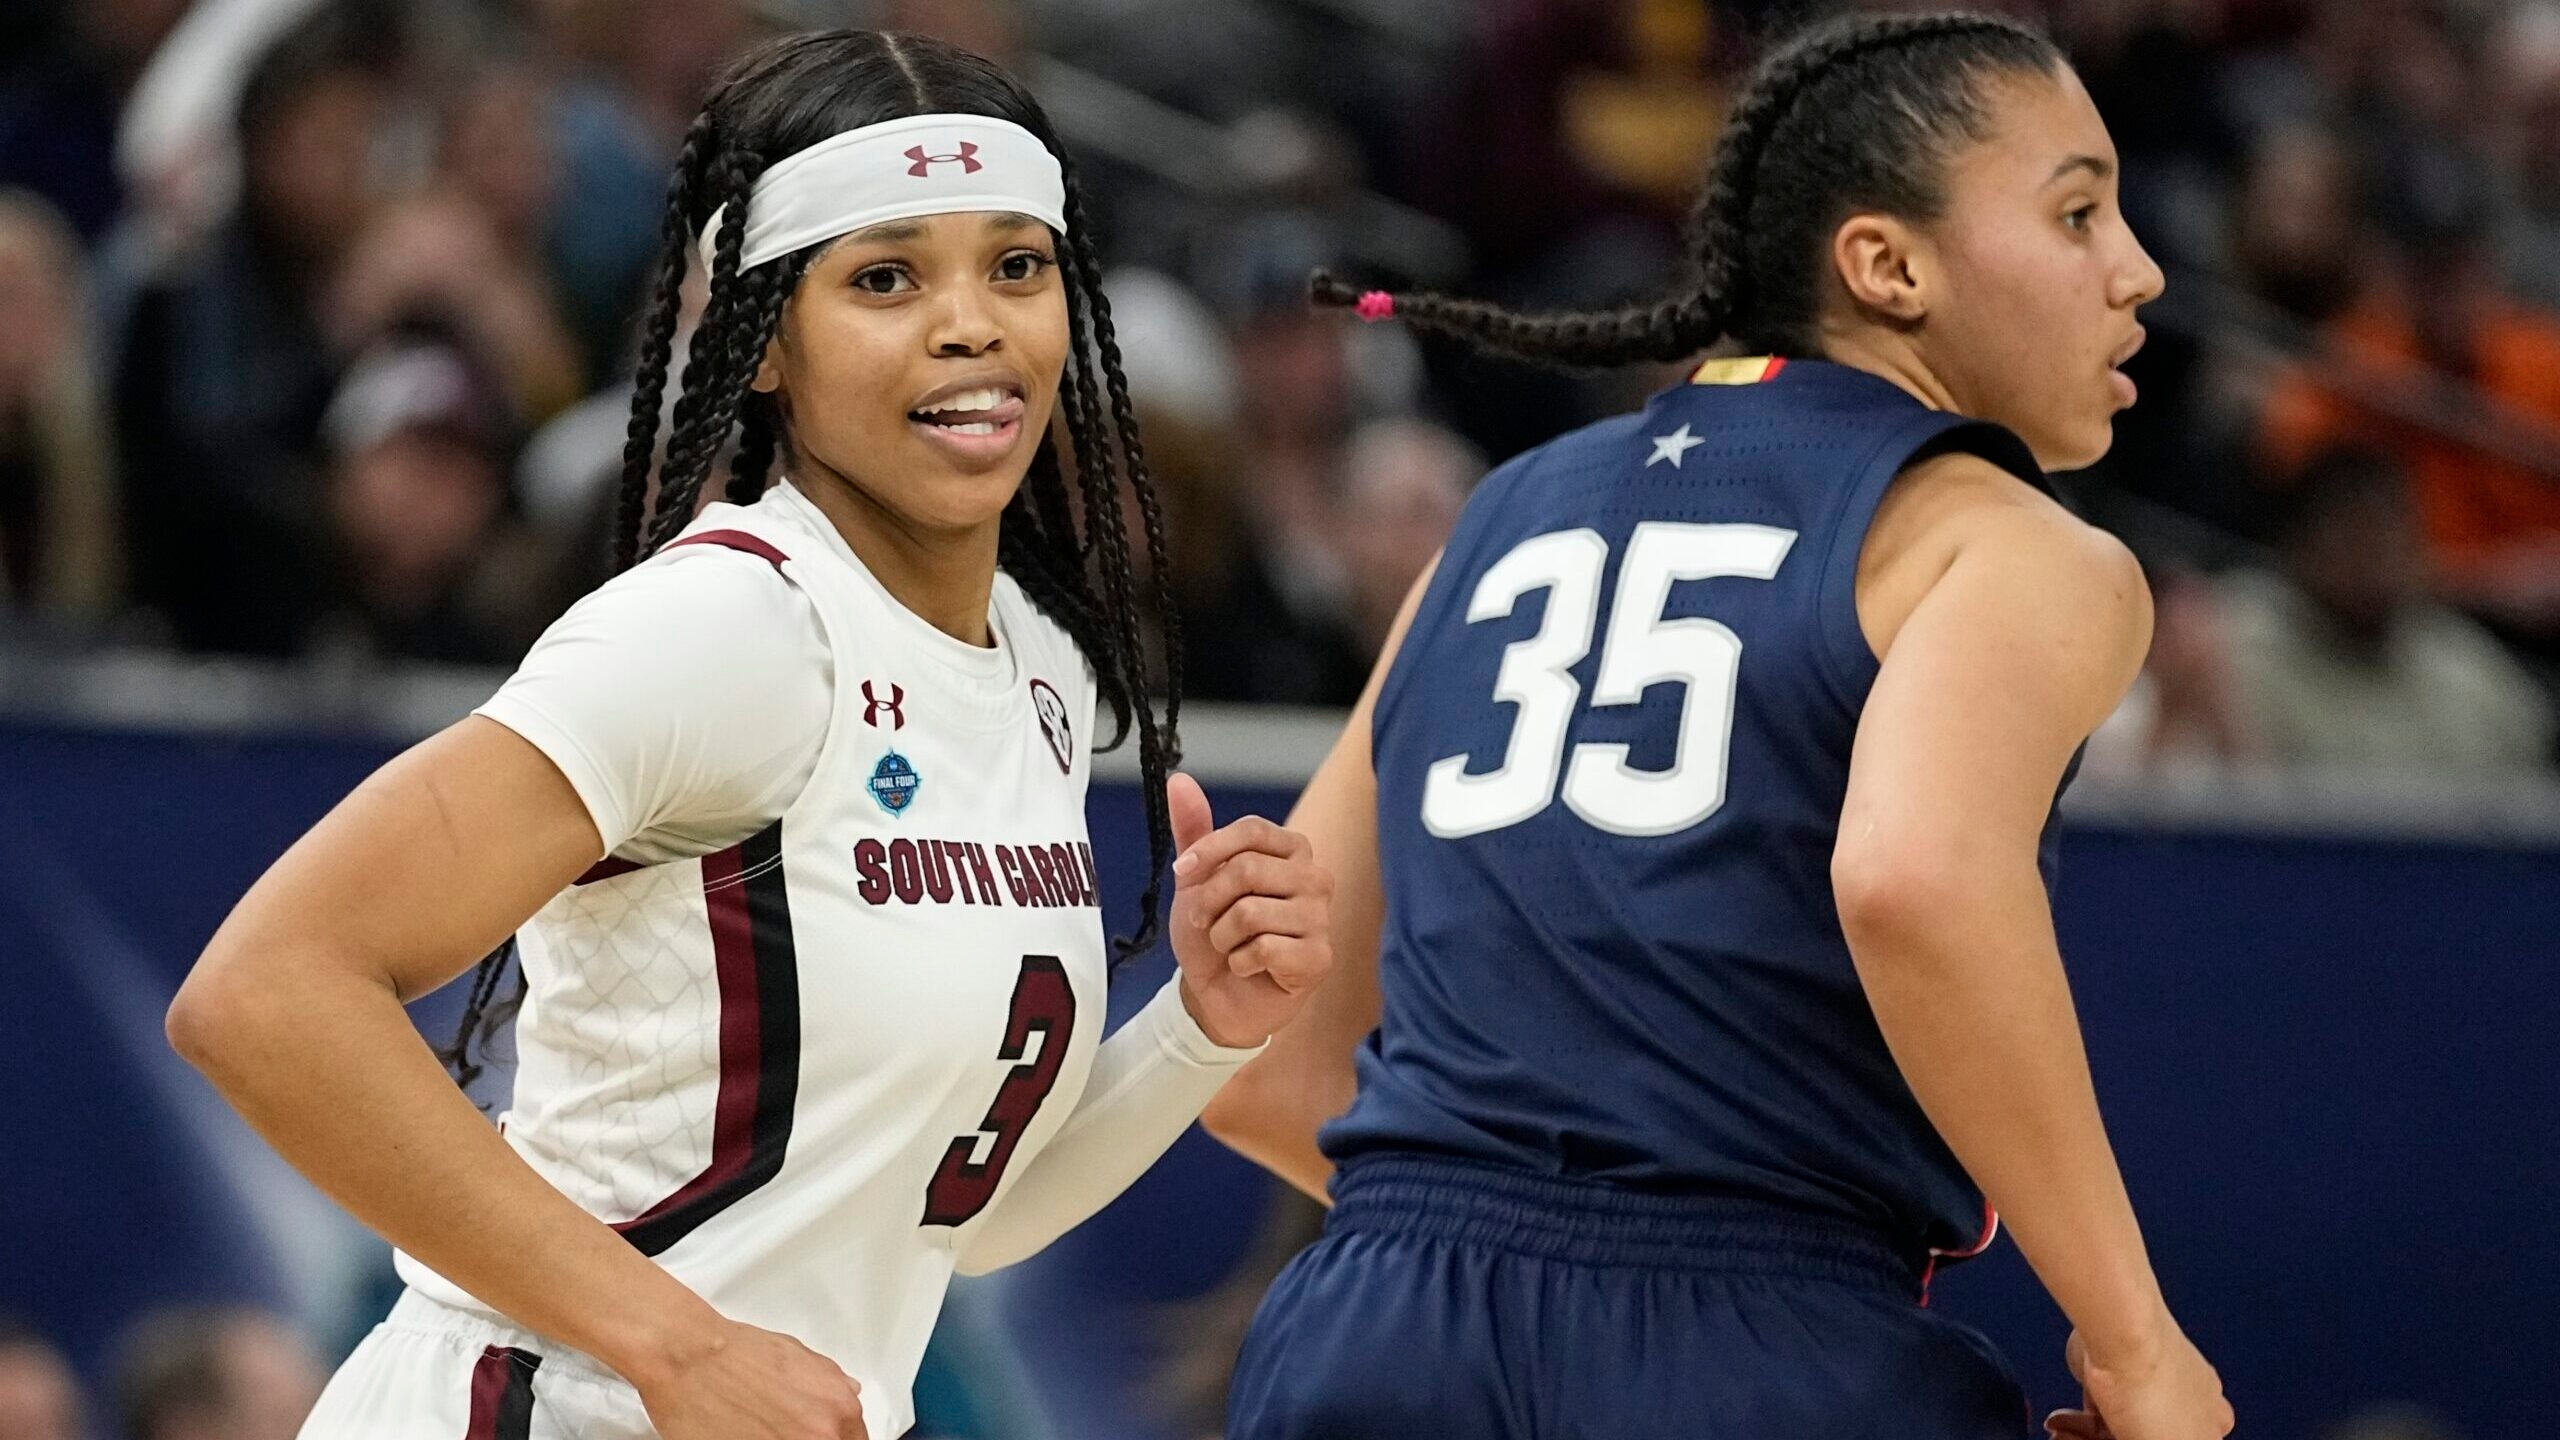 Staley Leads South Carolina Over Uconn For Second Ncaa Title Kstp